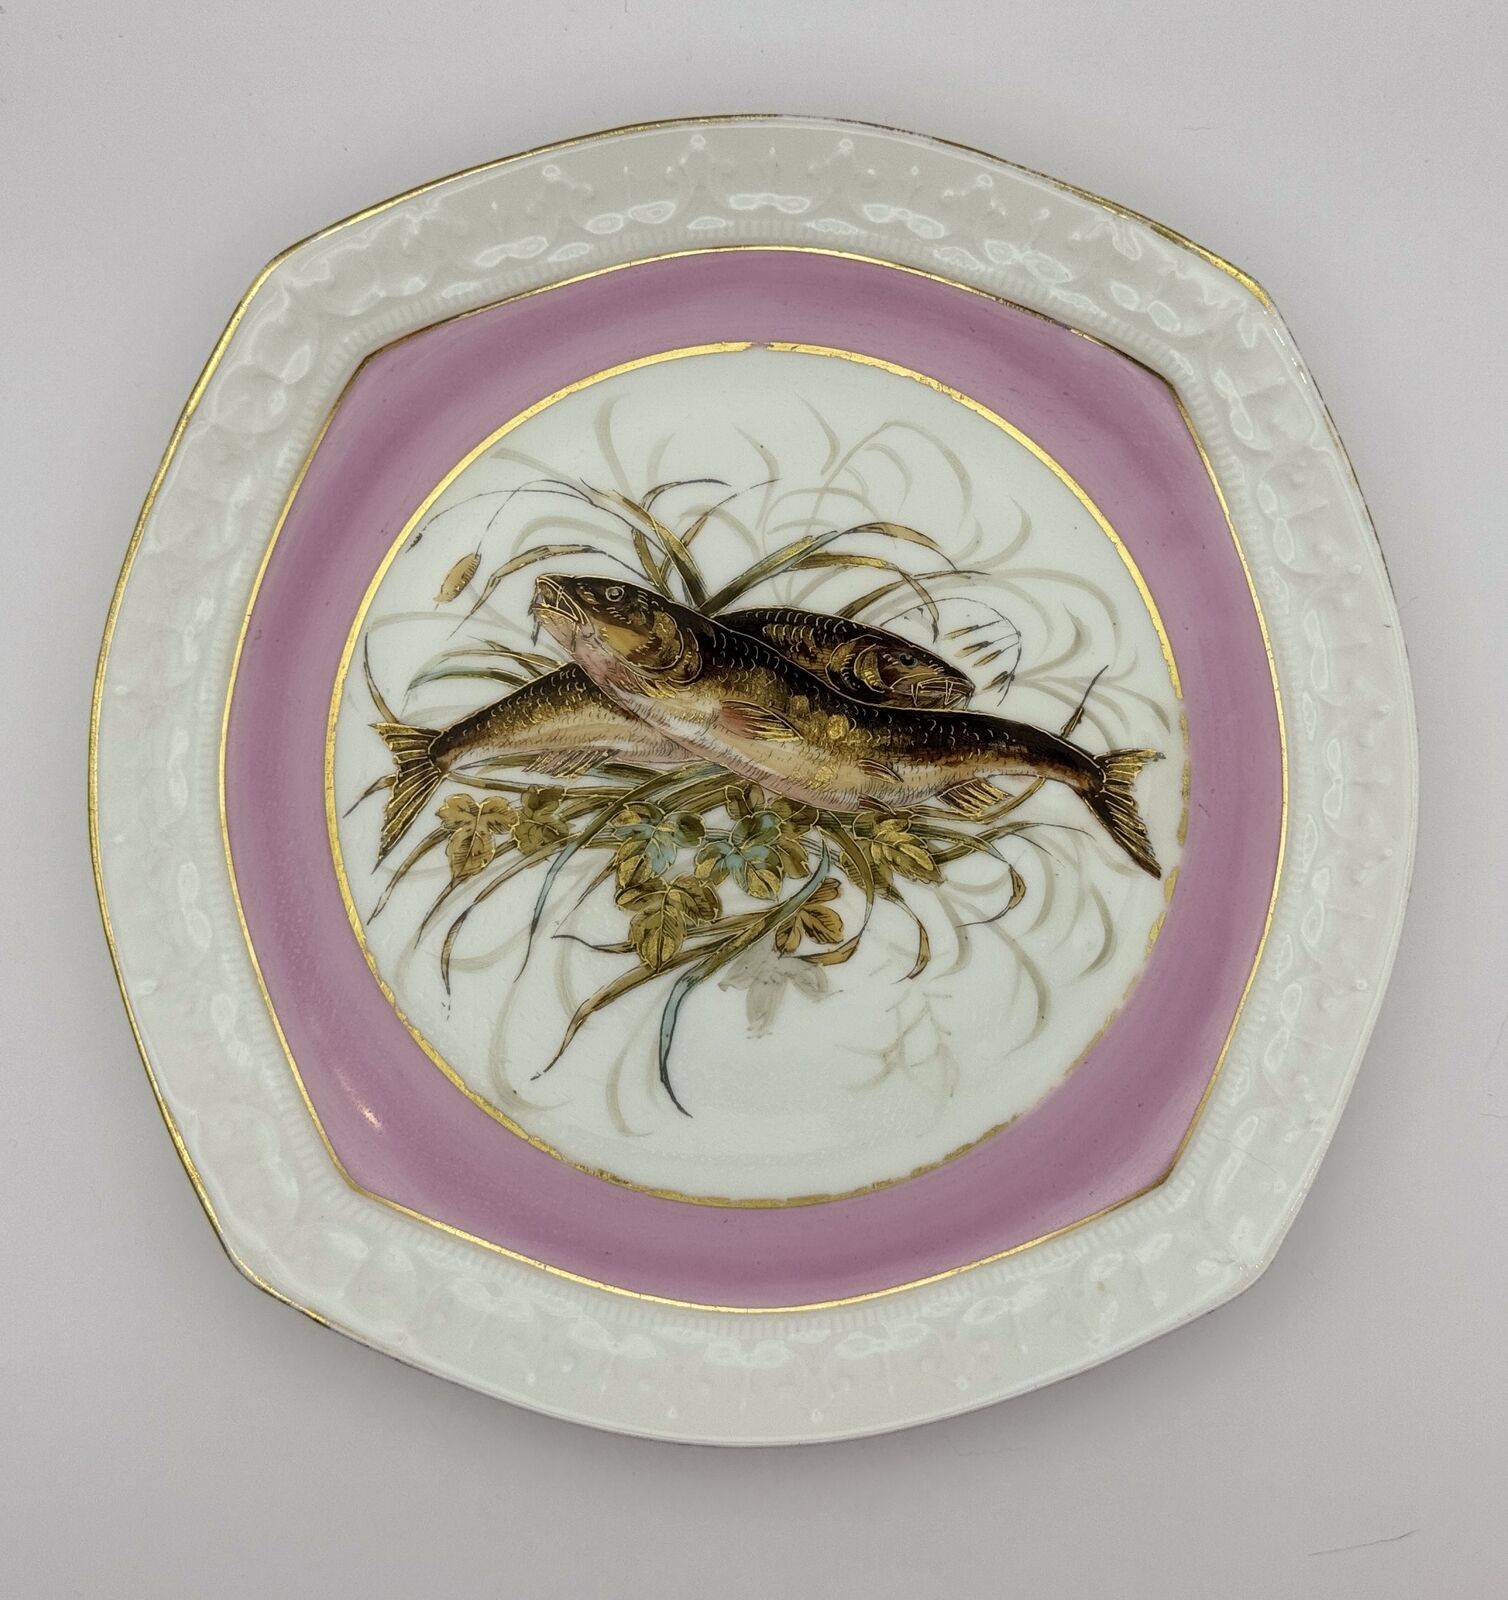 Bawo & Dotter Limoges Hand-Painted Fish Plate - Circa 1880s